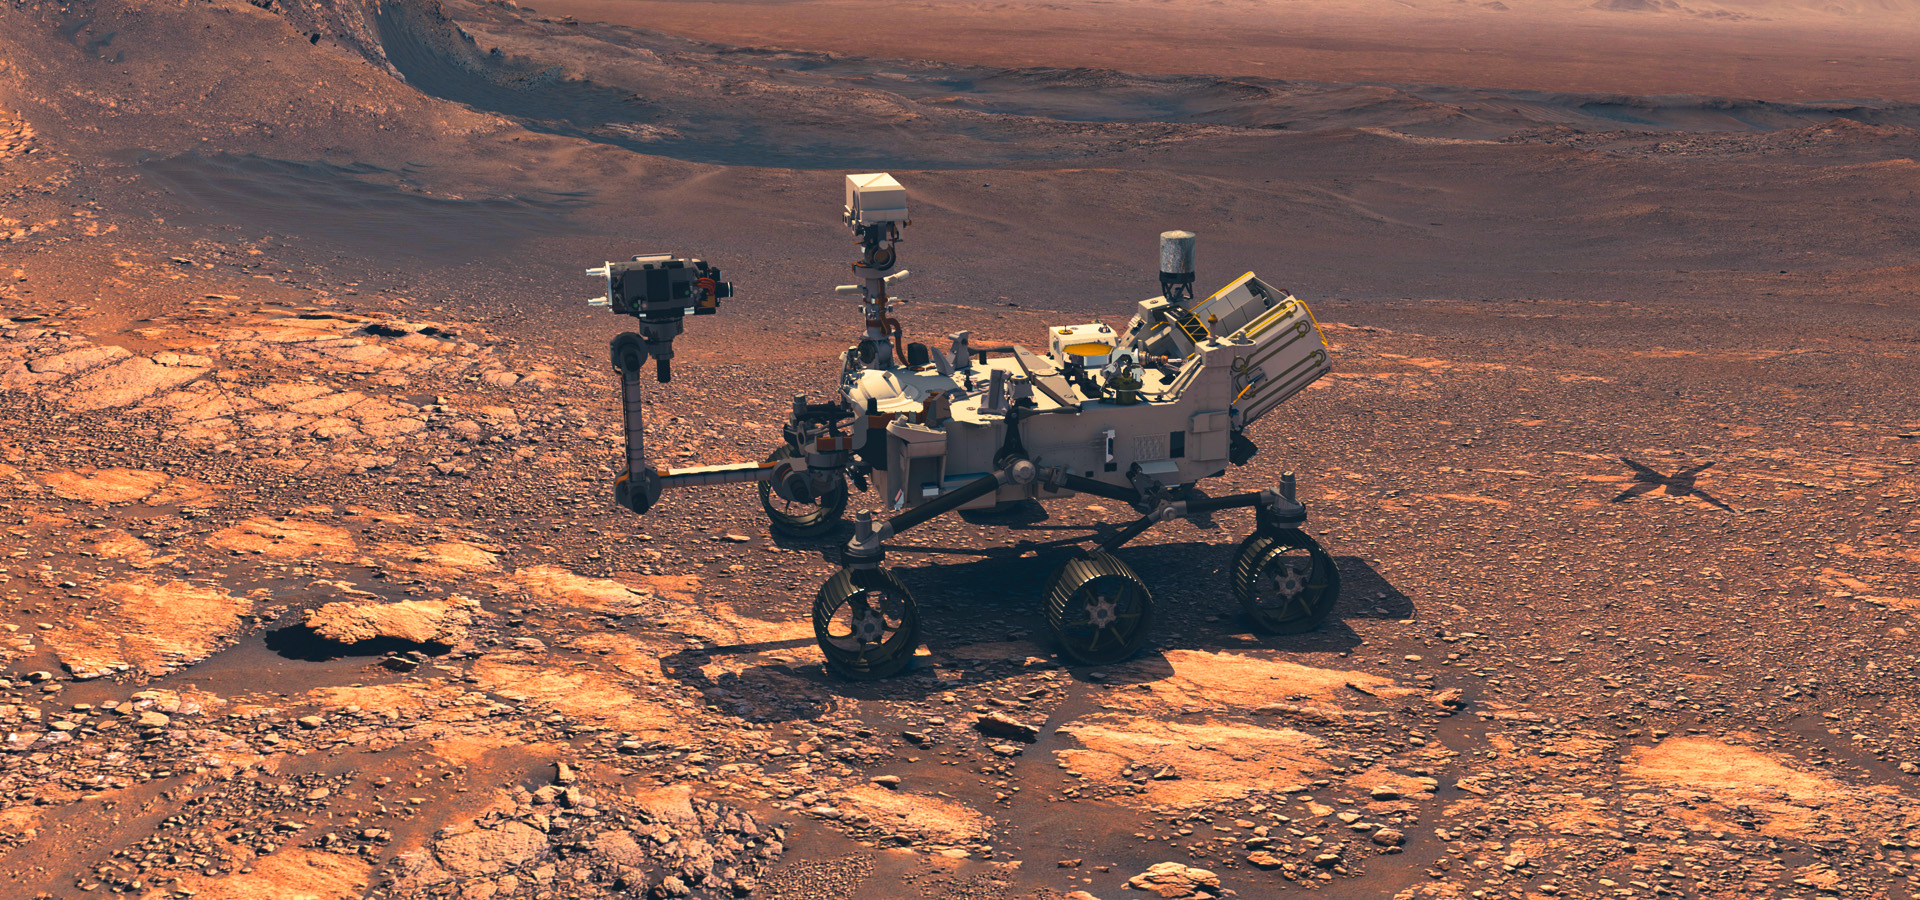 Car-sized NASA rover built to explore the Gale crater on the red planet